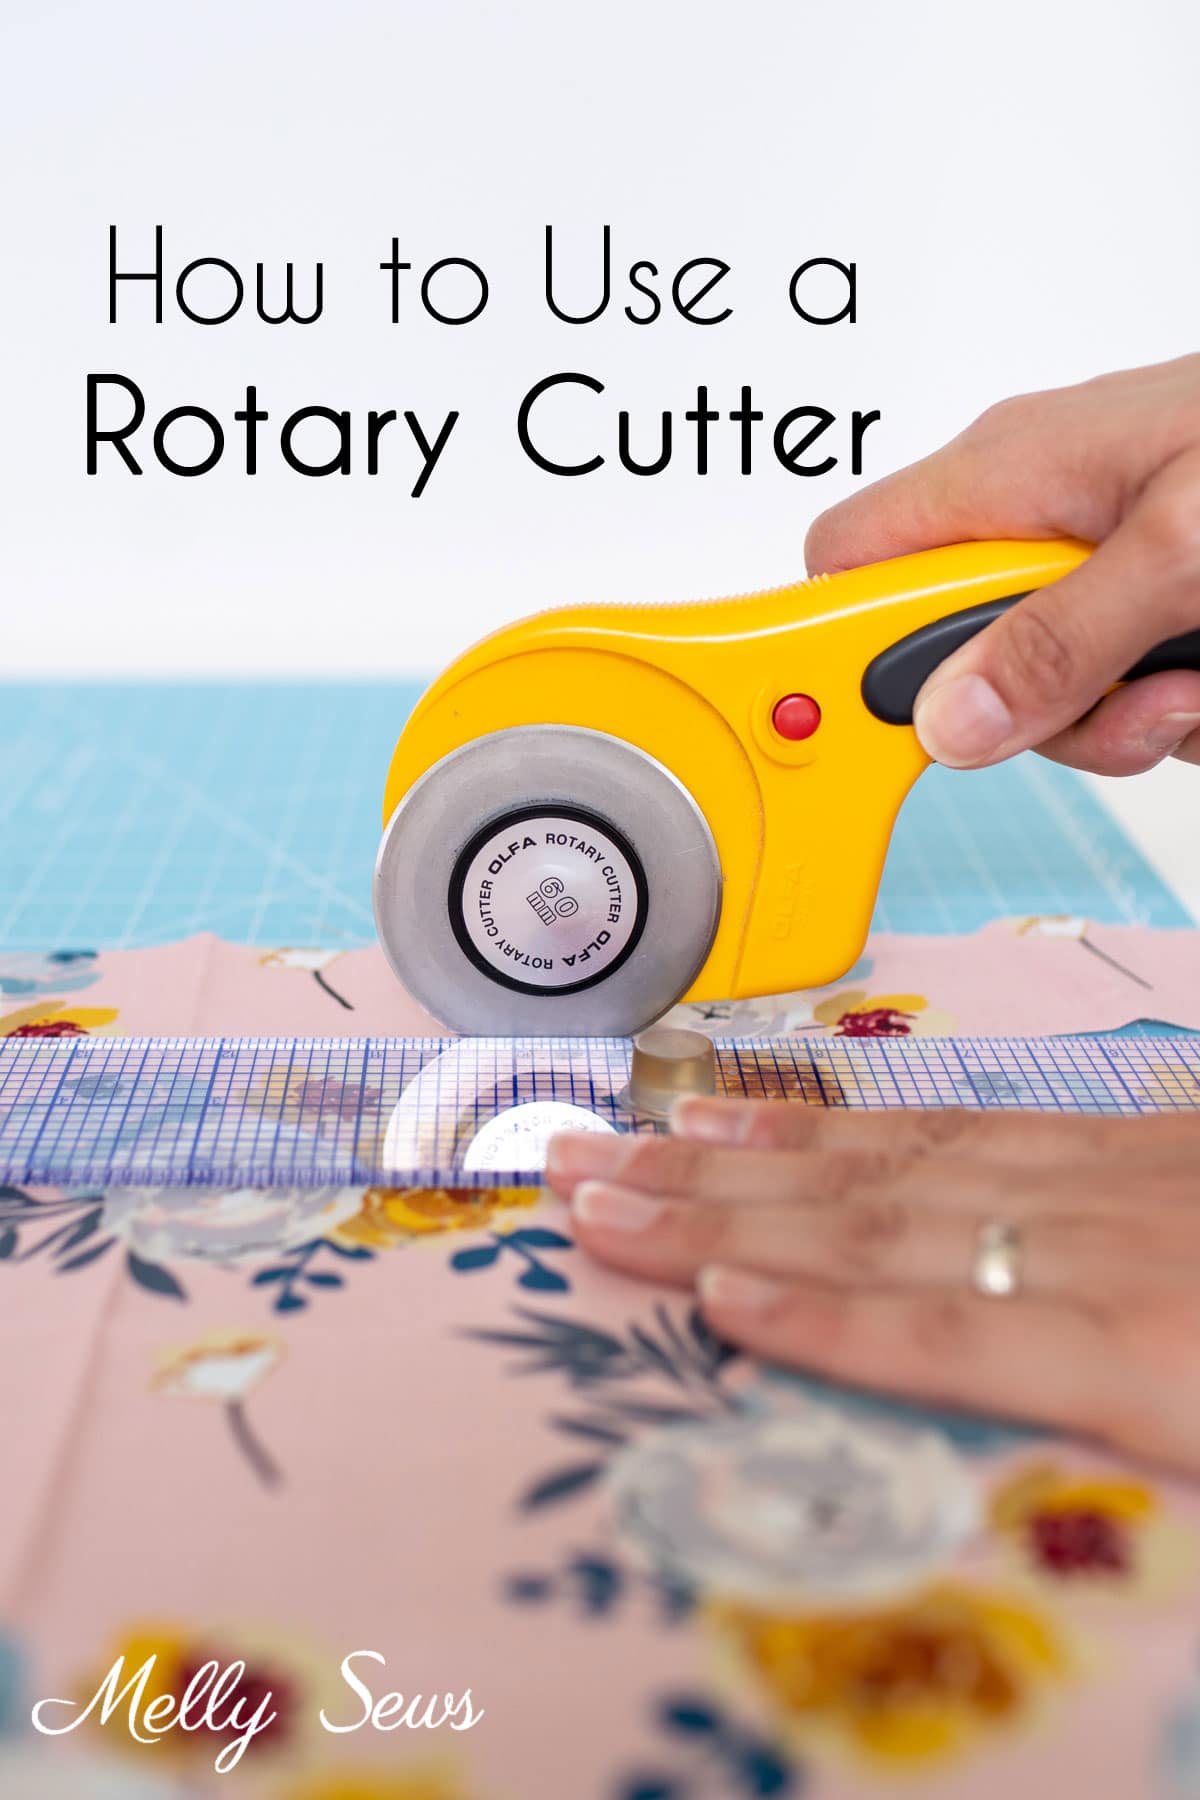 Is a Rotating Cutting Mat Worth It and Do You Need One? - Melly Sews